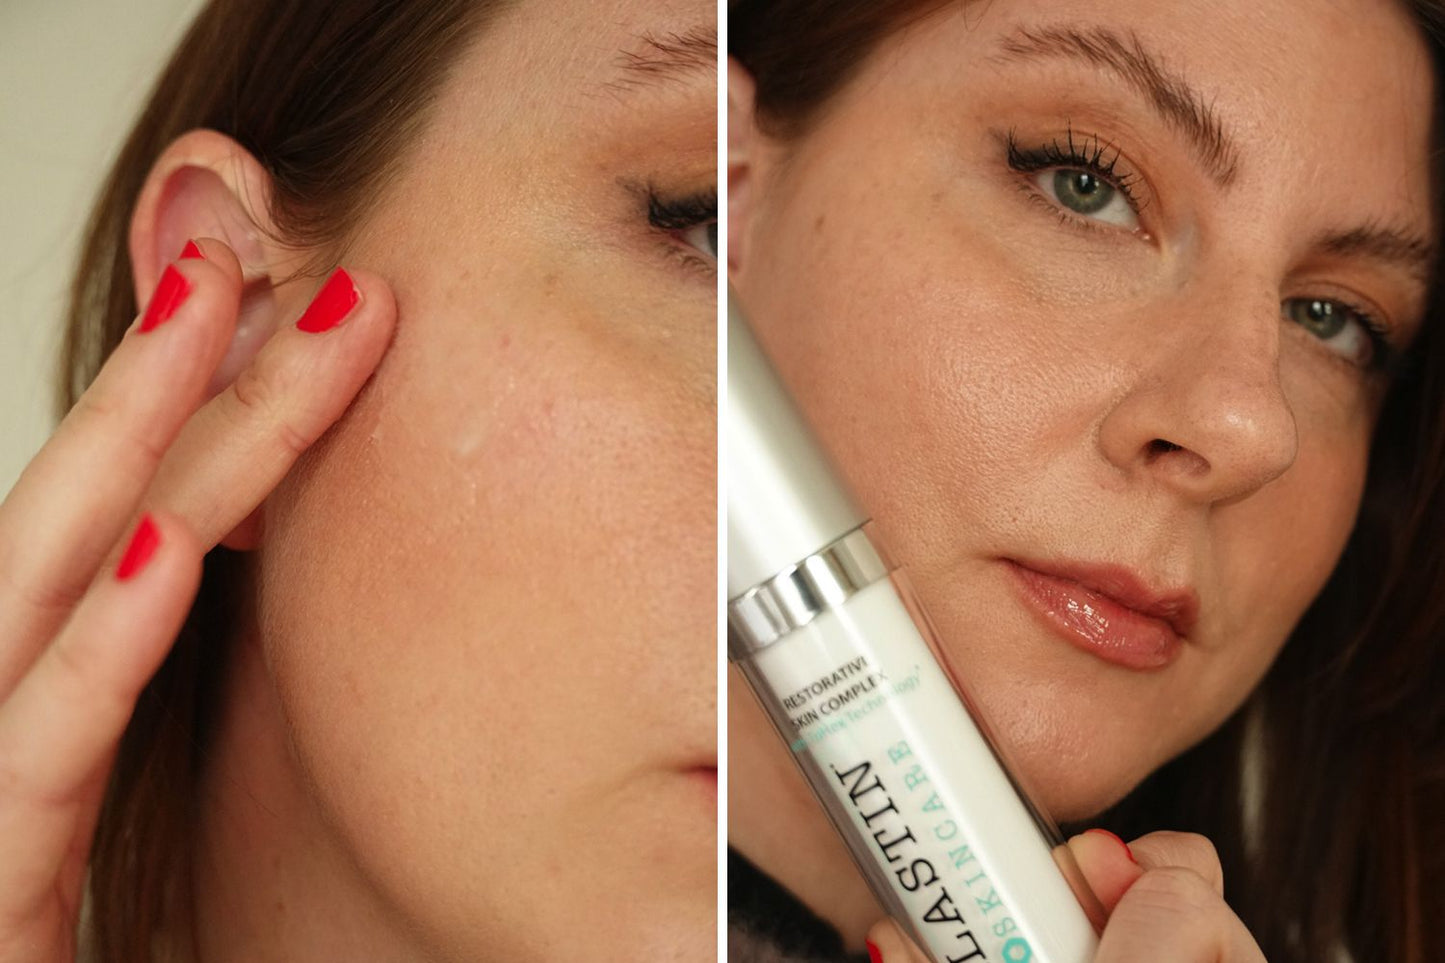  Alastin RESTORATIVE SKIN COMPLEX, before and after